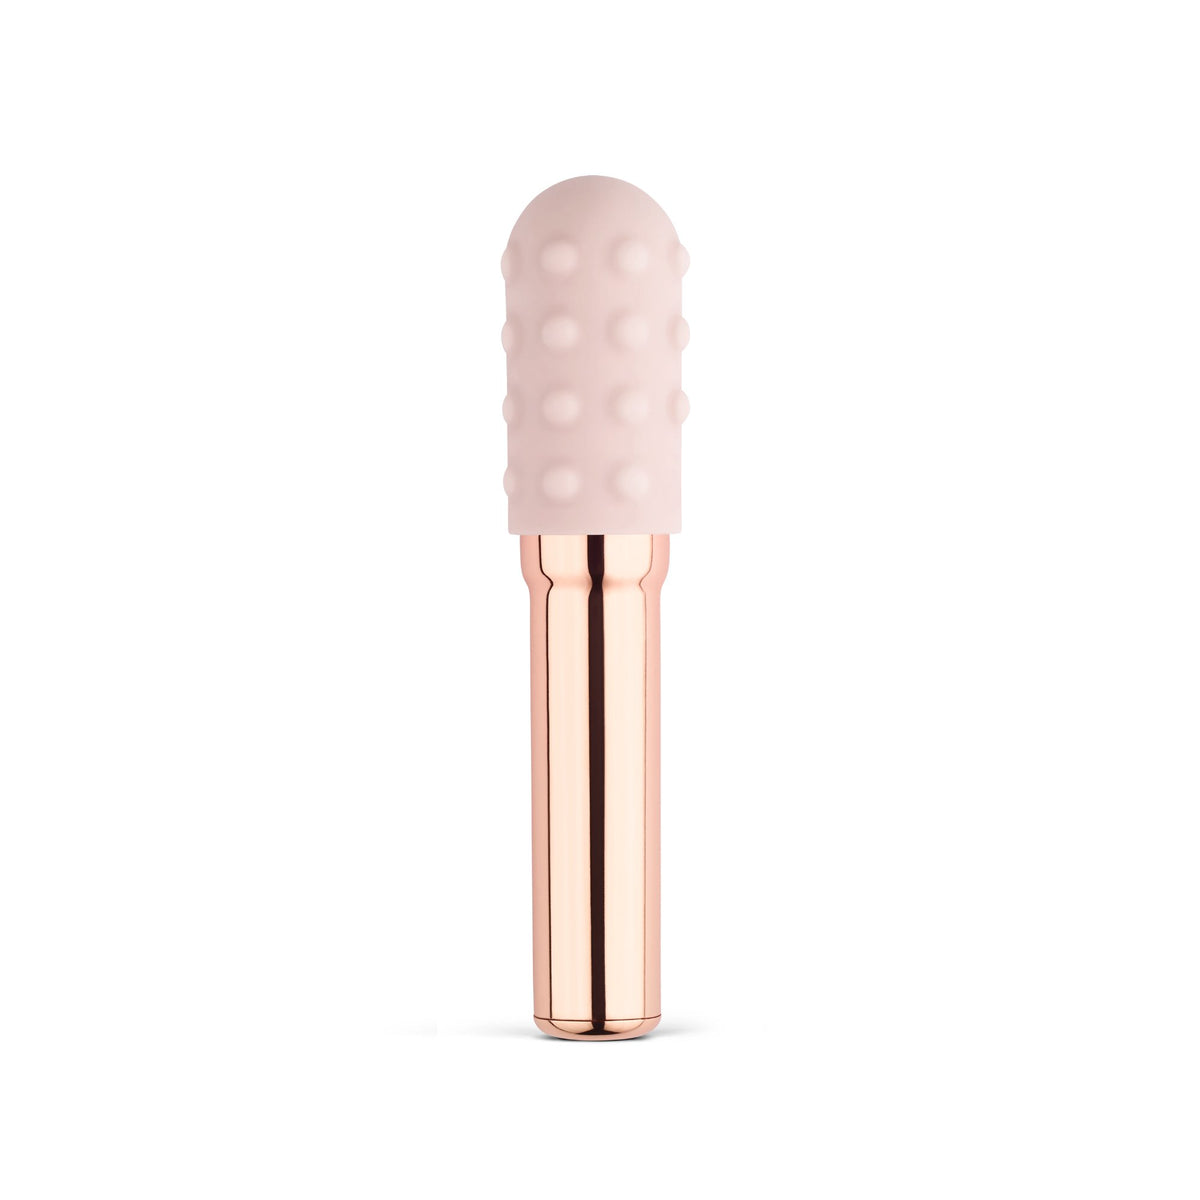 Le Wand Grand Bullet Rose Gold - The Cowgirl Sex Machine